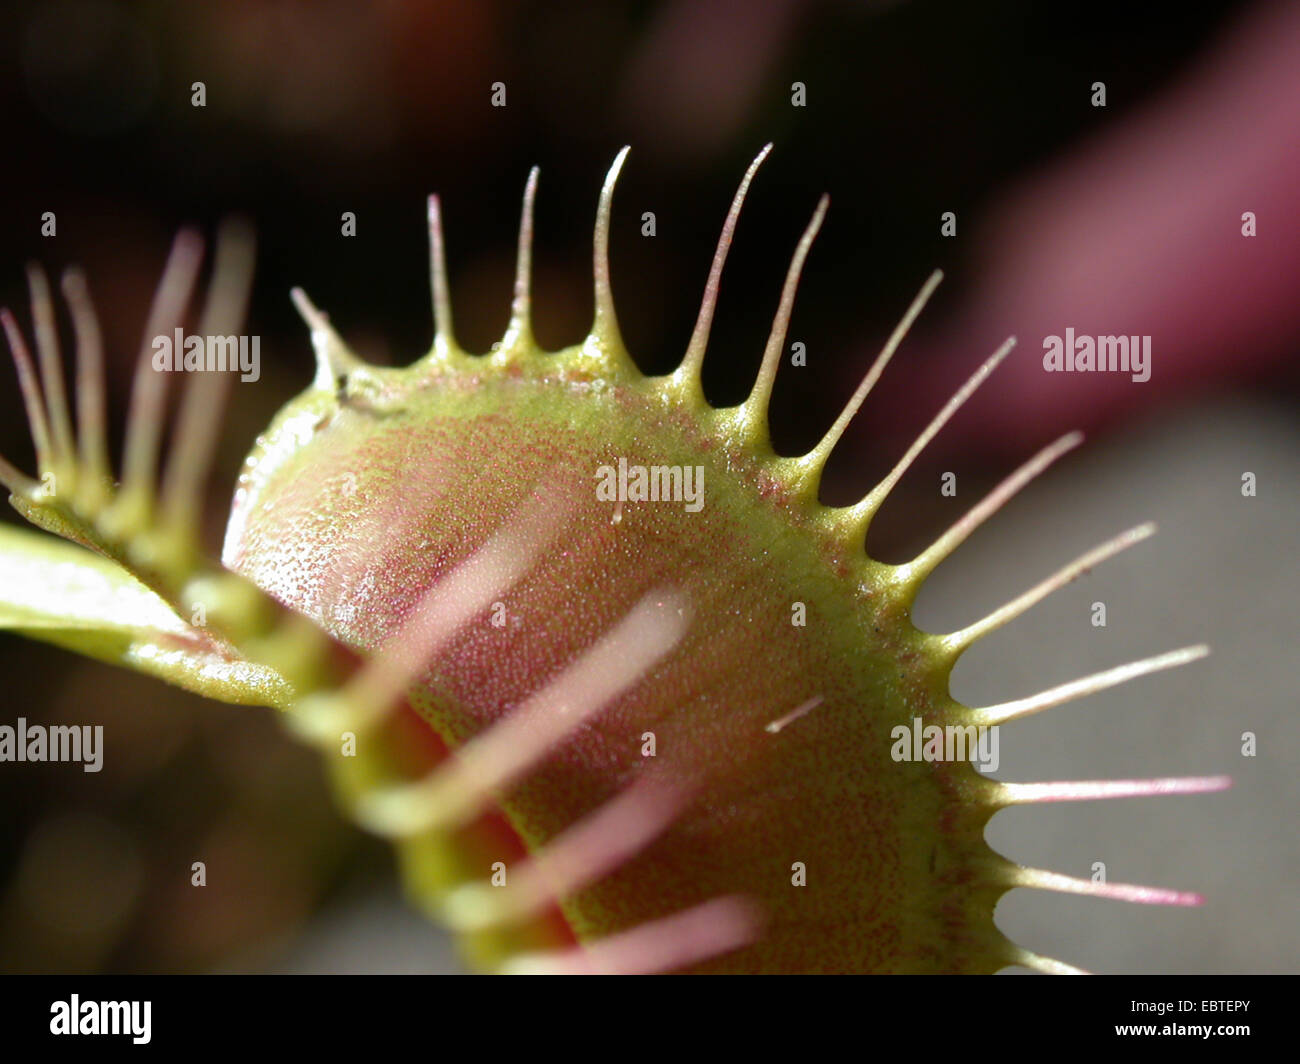 Venus Flytrap, Venus's Flytrap, Venus' Flytrap, Venus Fly Trap, Venus's Fly Trap, Venus' Fly Trap, Fly-Trap (Dionaea muscipula), trap, detail with trigger hairs Stock Photo